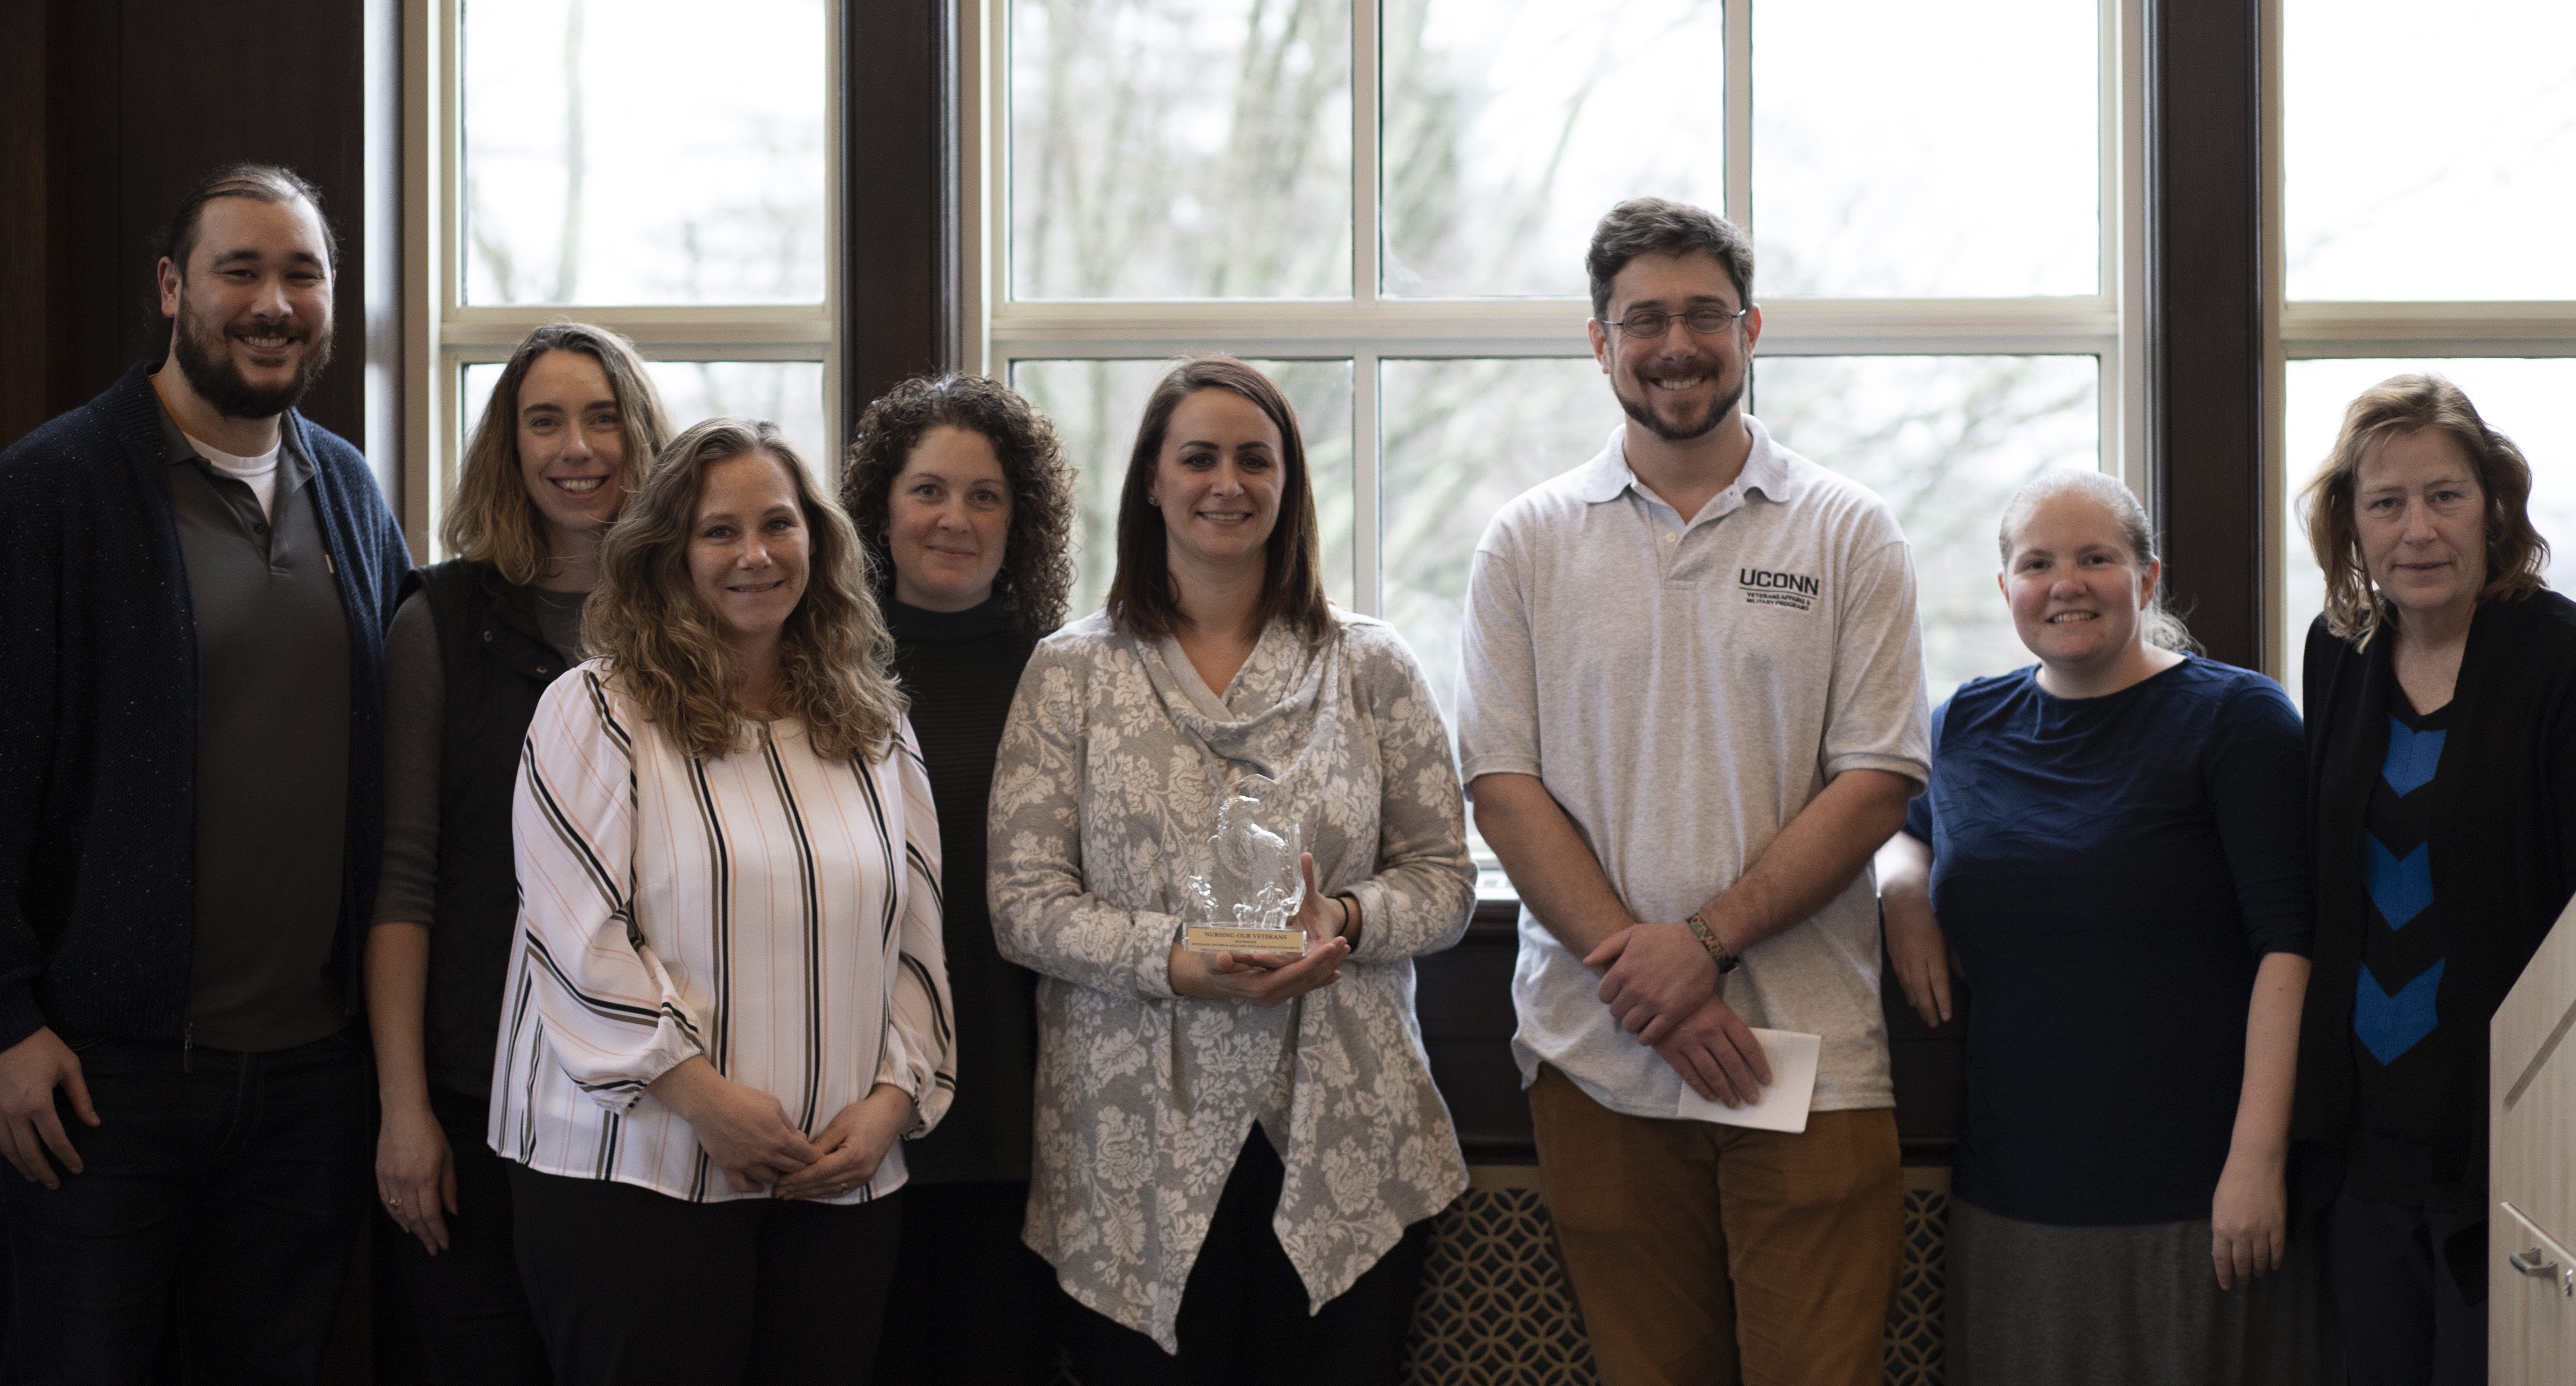 School of Nursing staff accept the trophy for the school’s winning performance in UConn Office of Veterans Affairs and Military Programs’ 7th Annual Homeless Veteran Care Package Drive on February 10, 2020, in the Wilbur Cross North Reading Room.